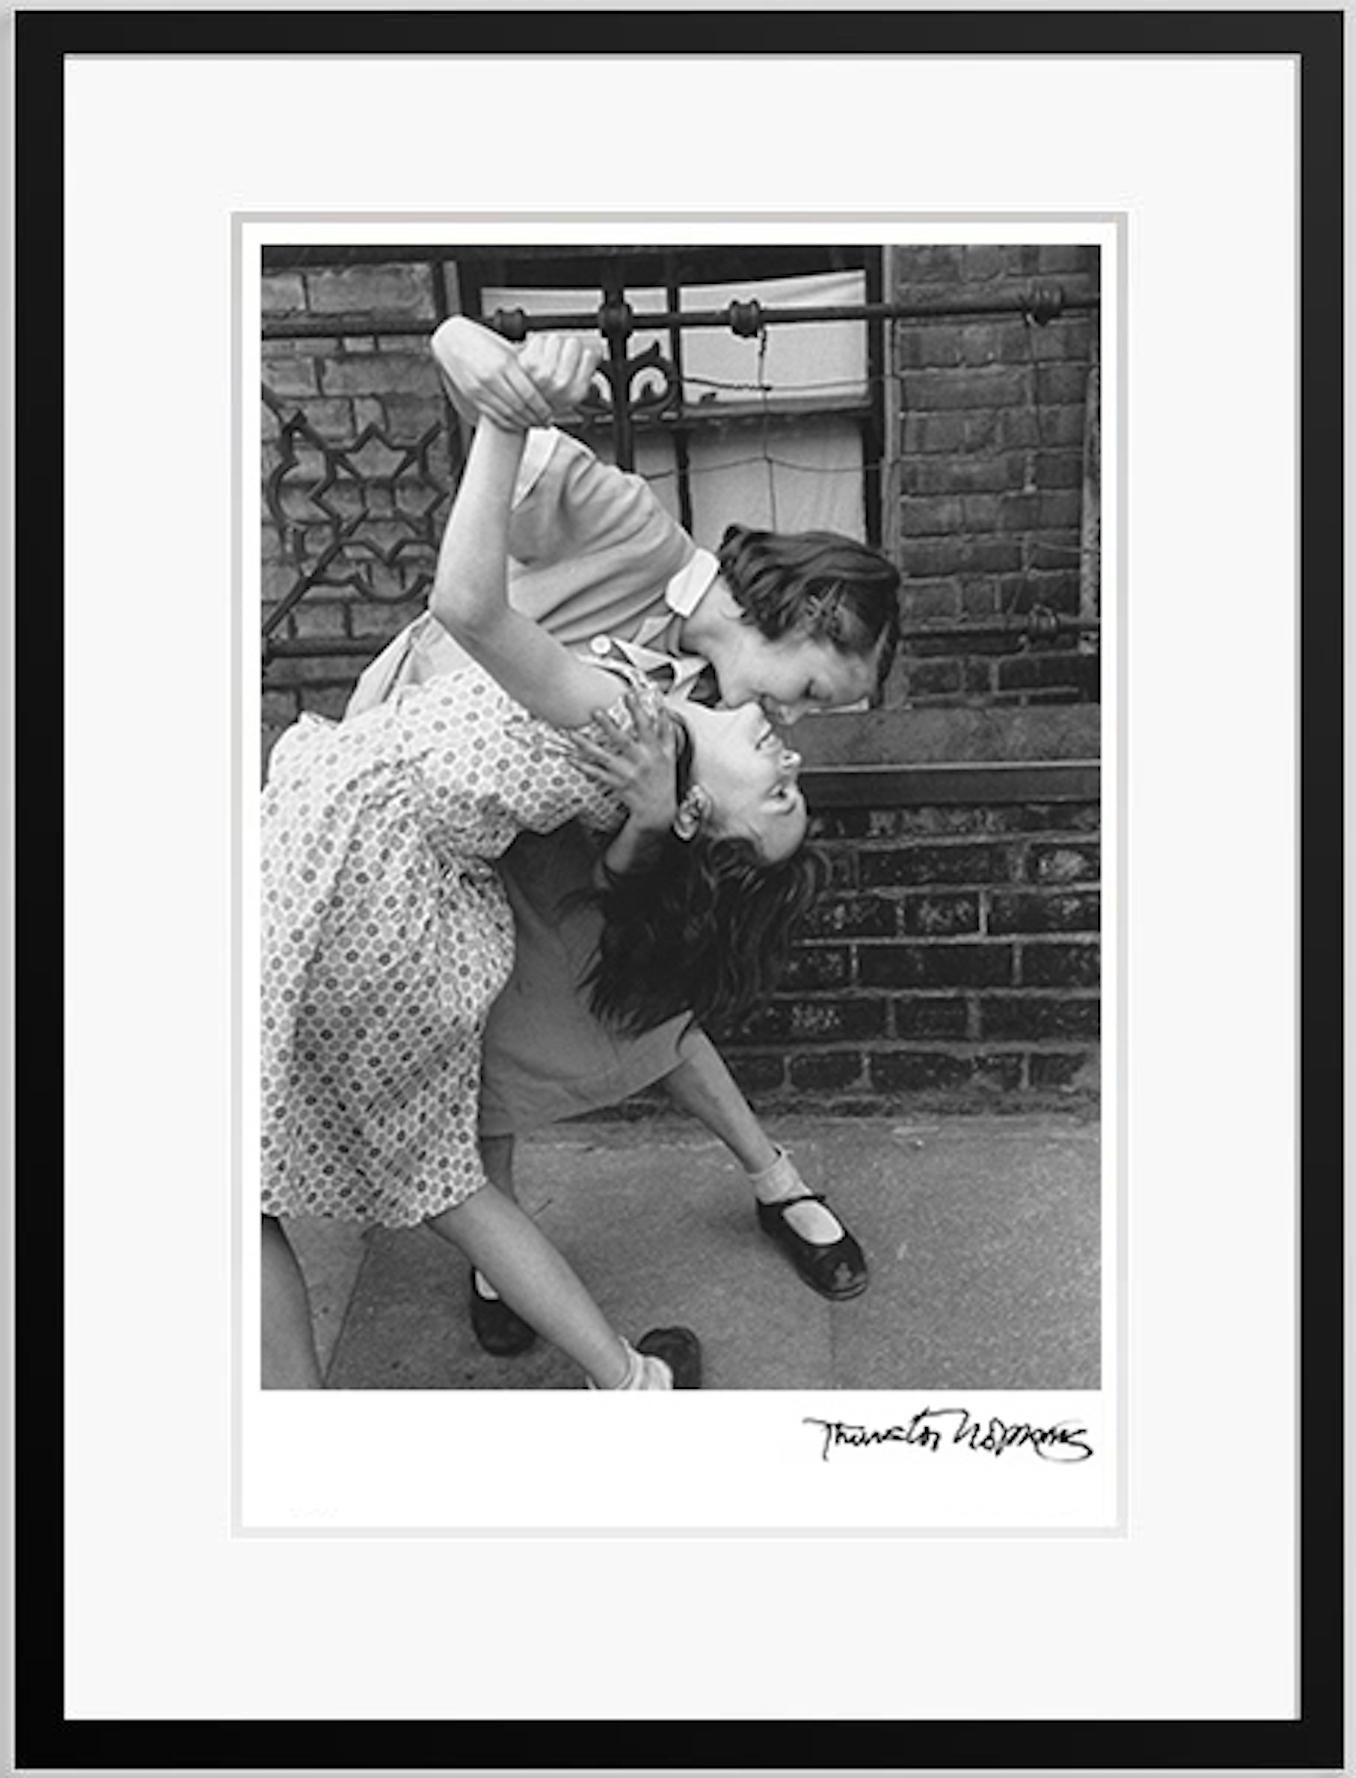 Thurston Hopkins Black and White Photograph – Dancing in the Street (gerahmt)